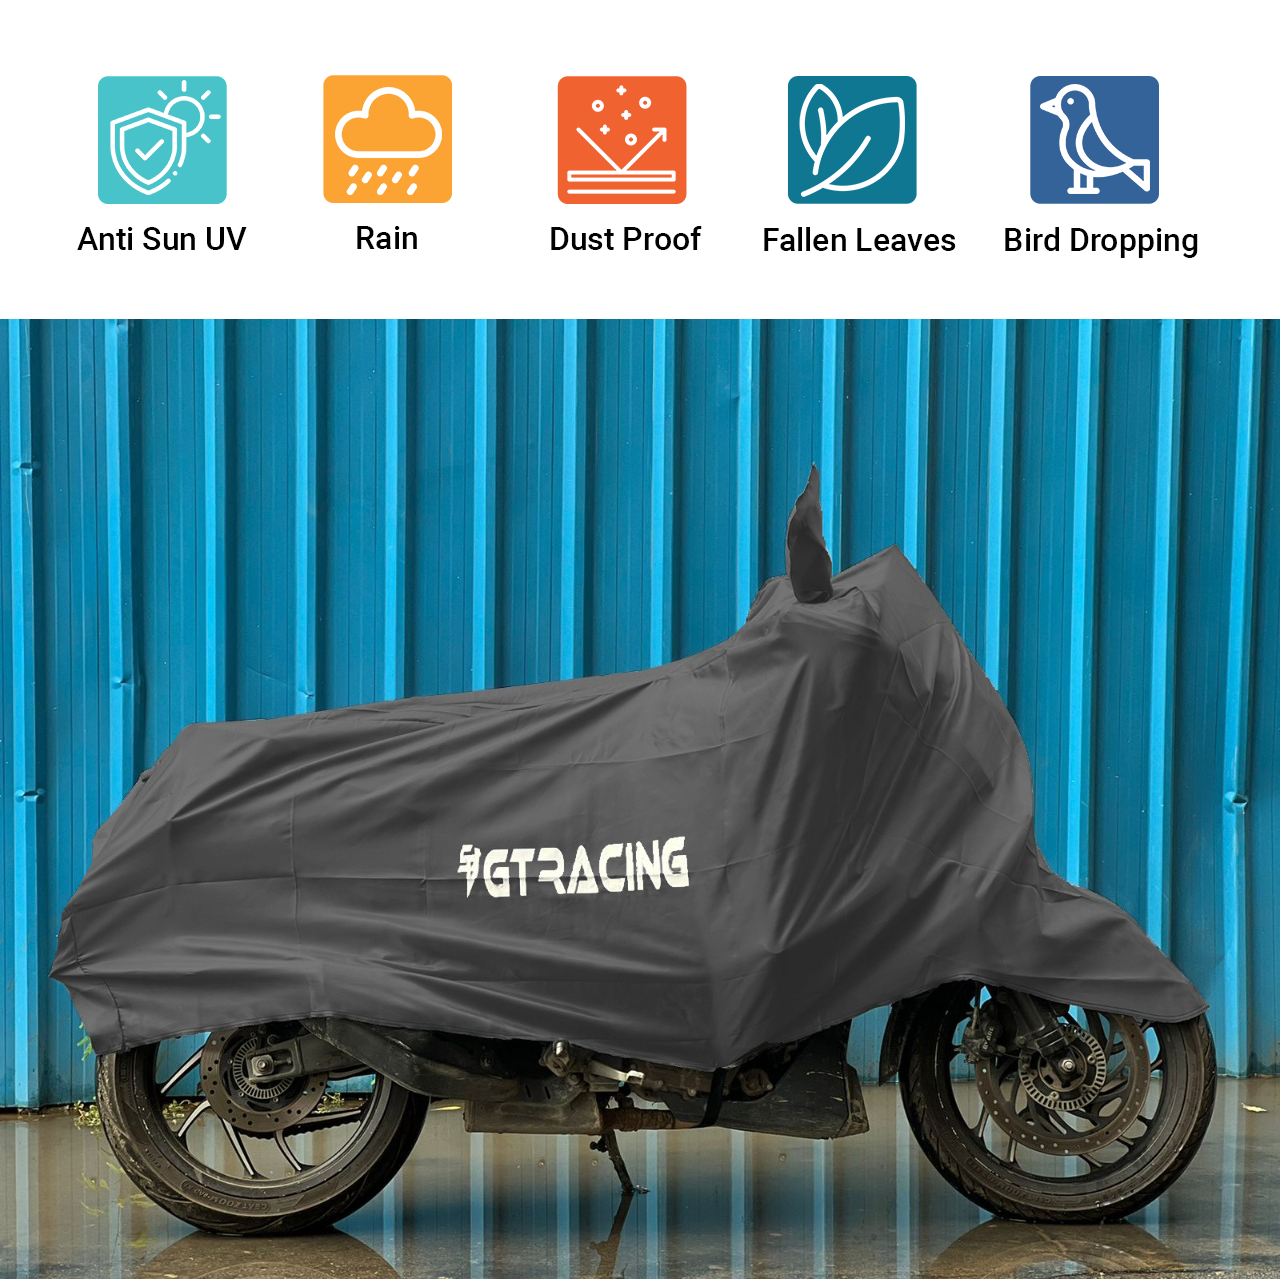 Steelbird Bike Cover GT Racing UV Protection Water-Resistant & Dustproof (2X2 Grey), Bike Body Cover With Carry Bag (All Bikes Upto Pulsar 180cc Size)